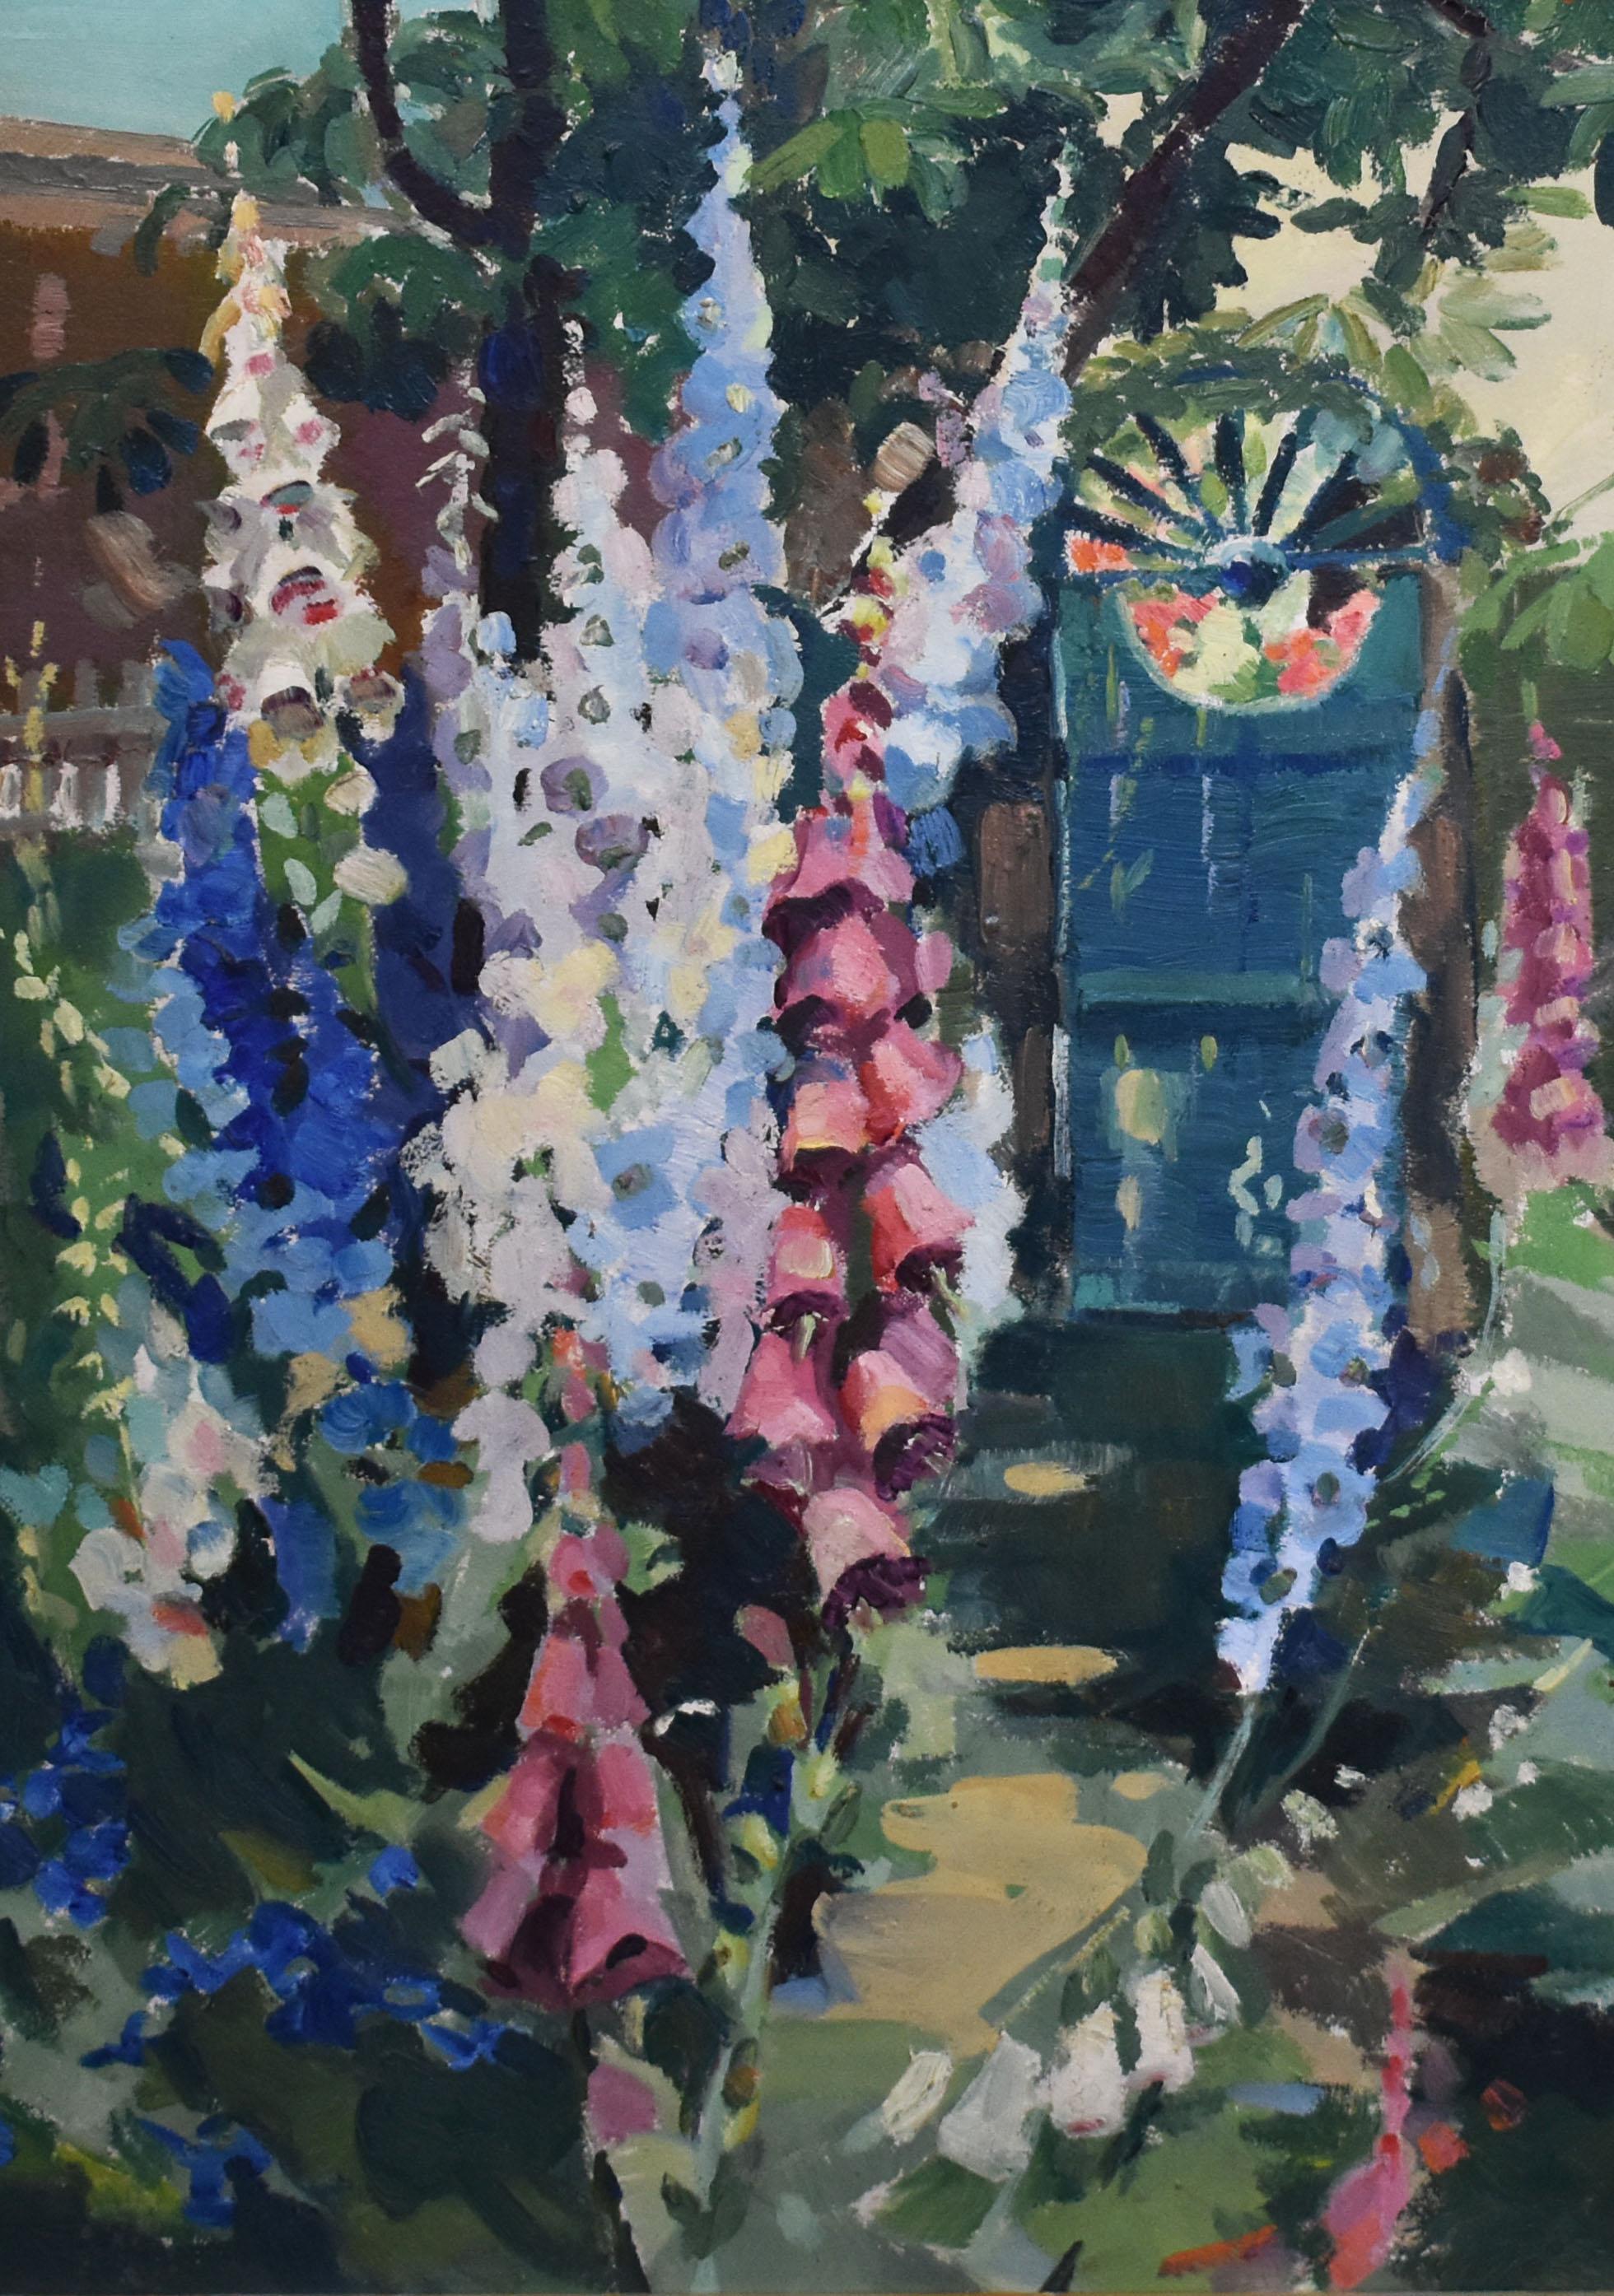 Antique American impressionist oil painting of a garden by Helen Oehler  (1893 - 1979).  Oil on board, circa 1920. Signed.  Displayed in a period giltwood frame.  Image size, 30